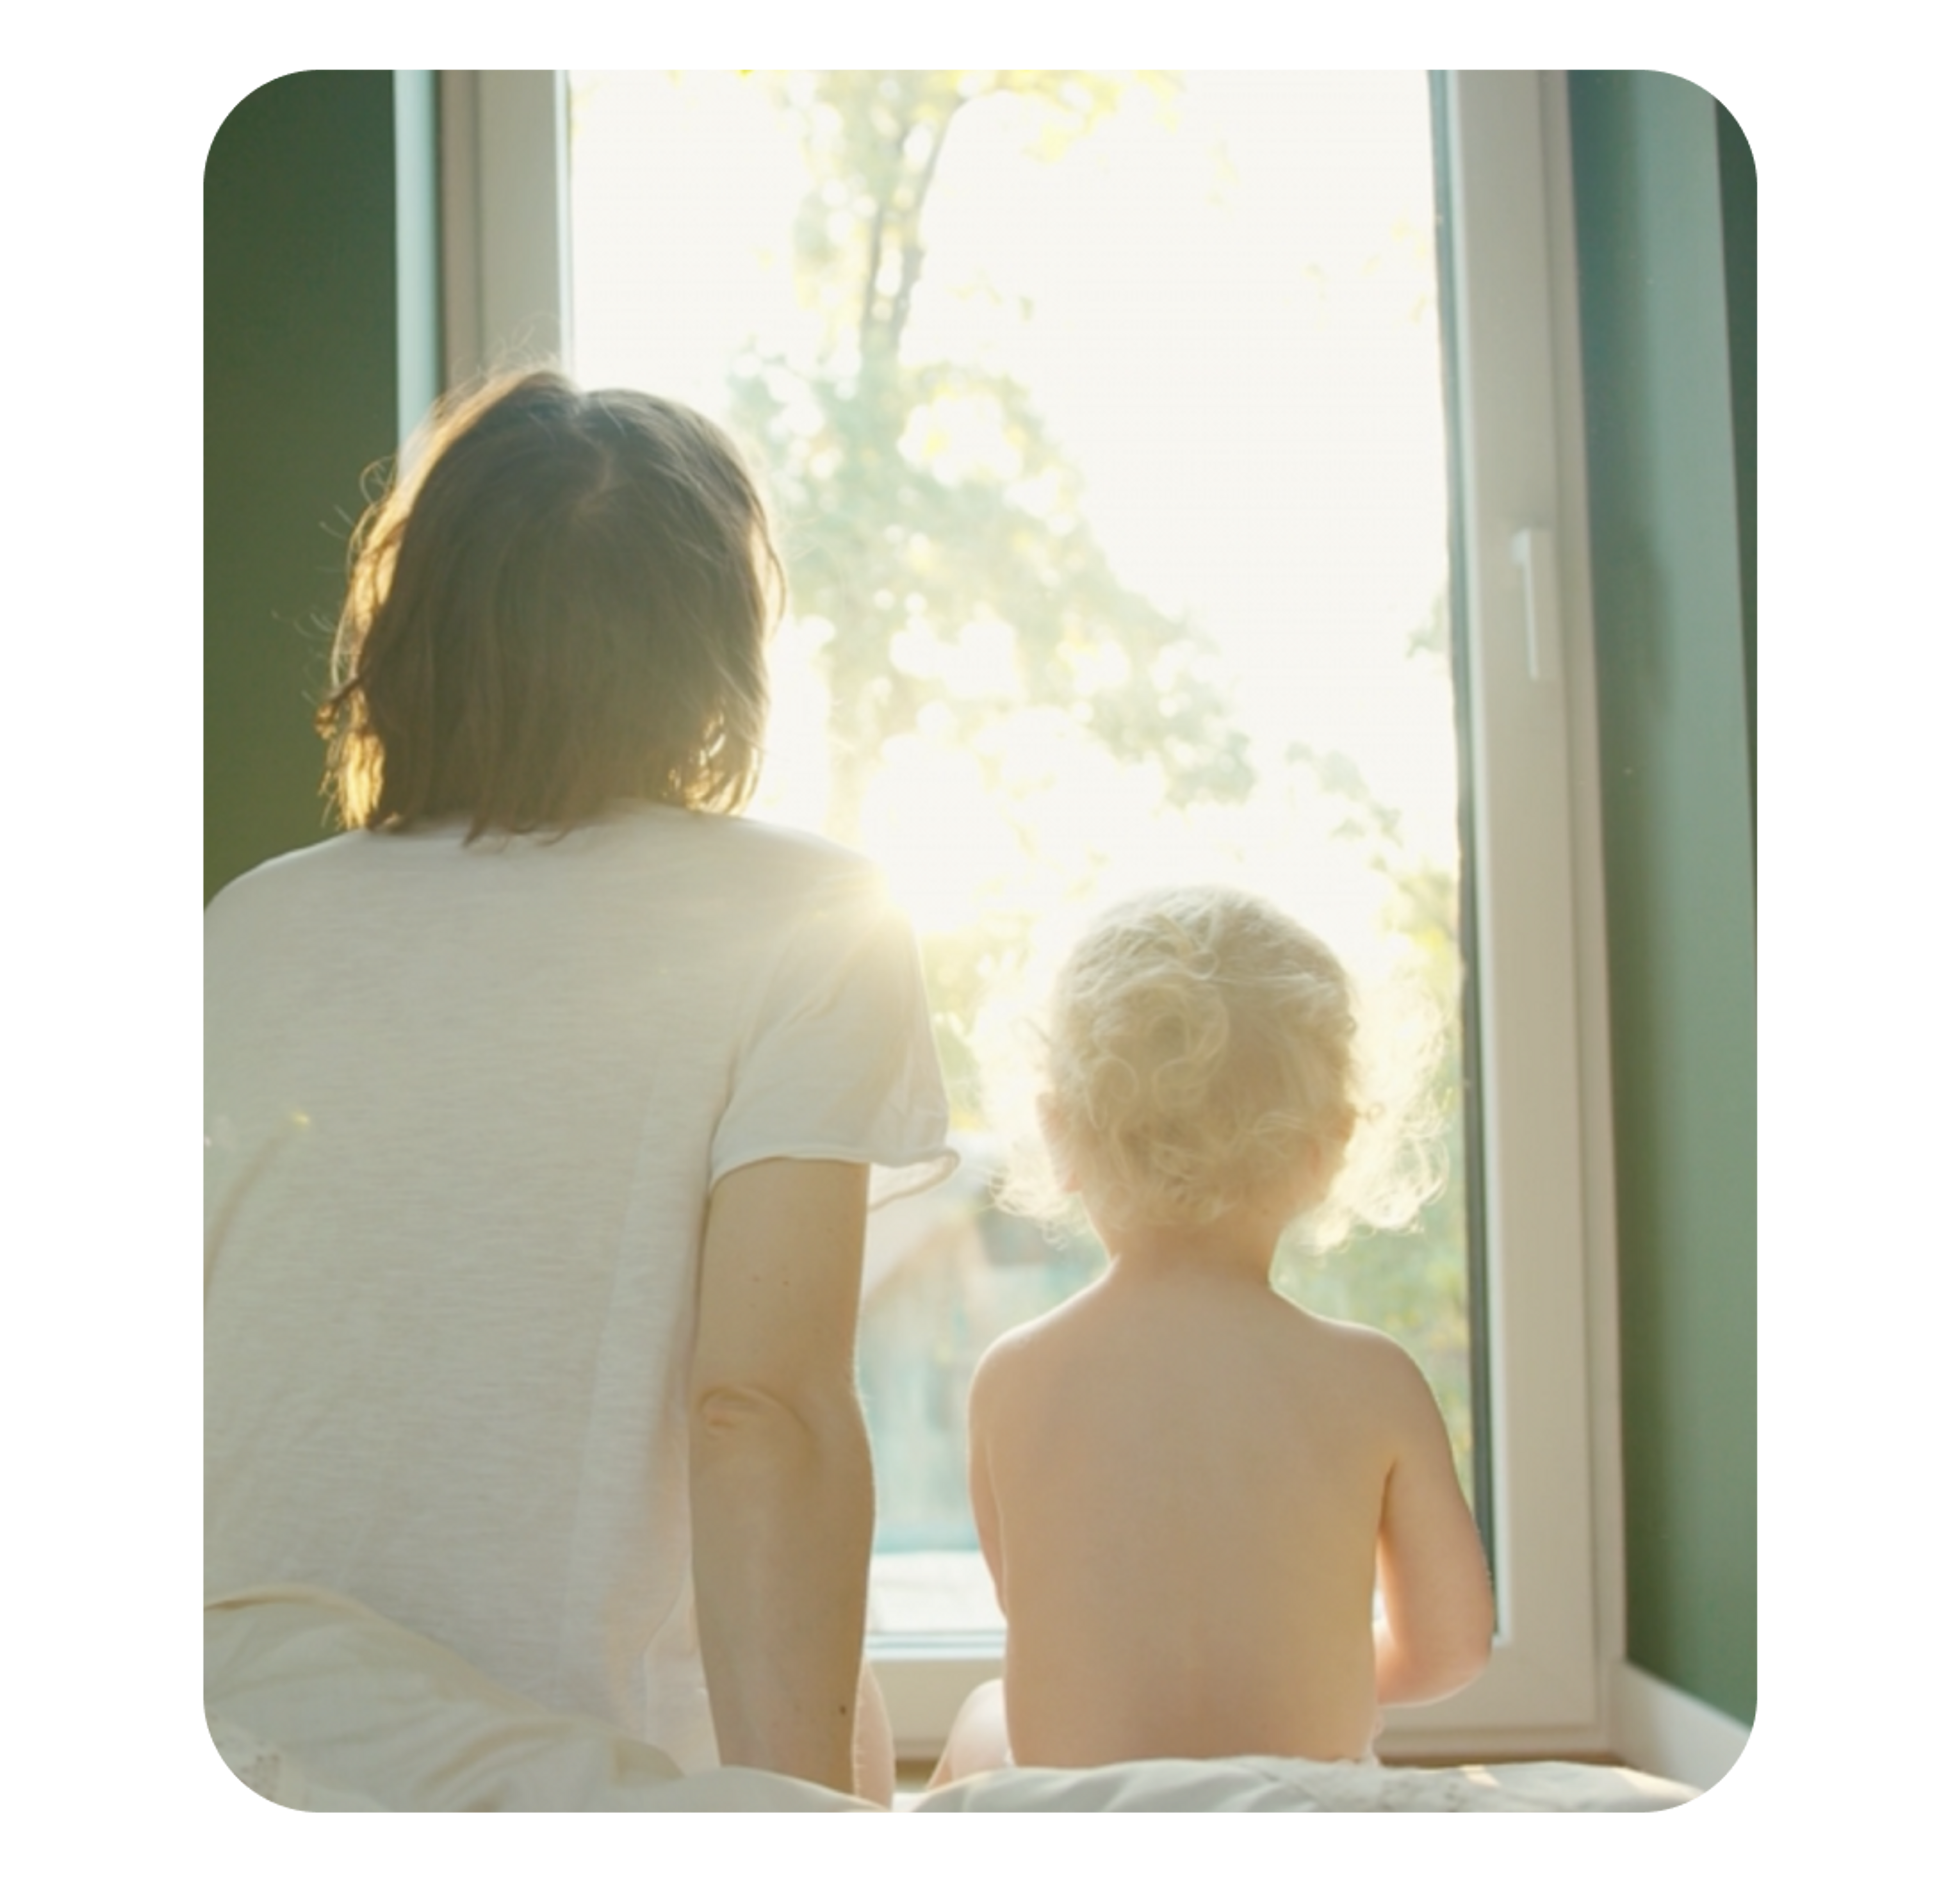 A photo of a woman and a child looking out of a window